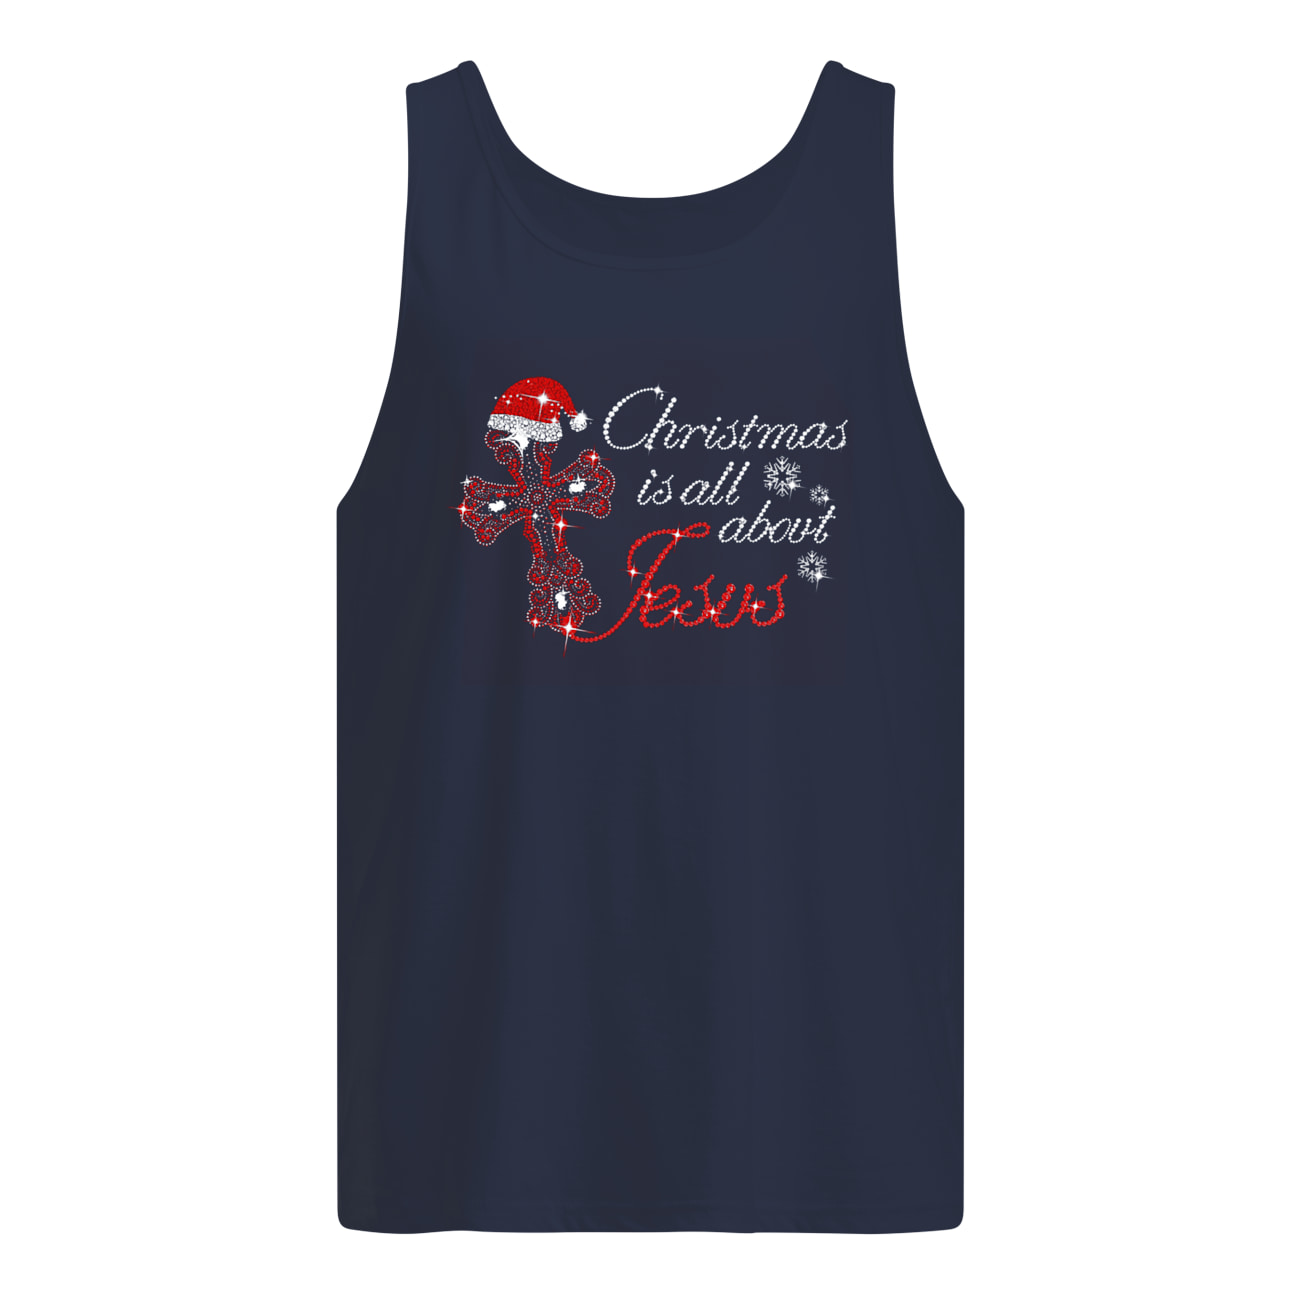 Cross christmas is all about Jesus tank top